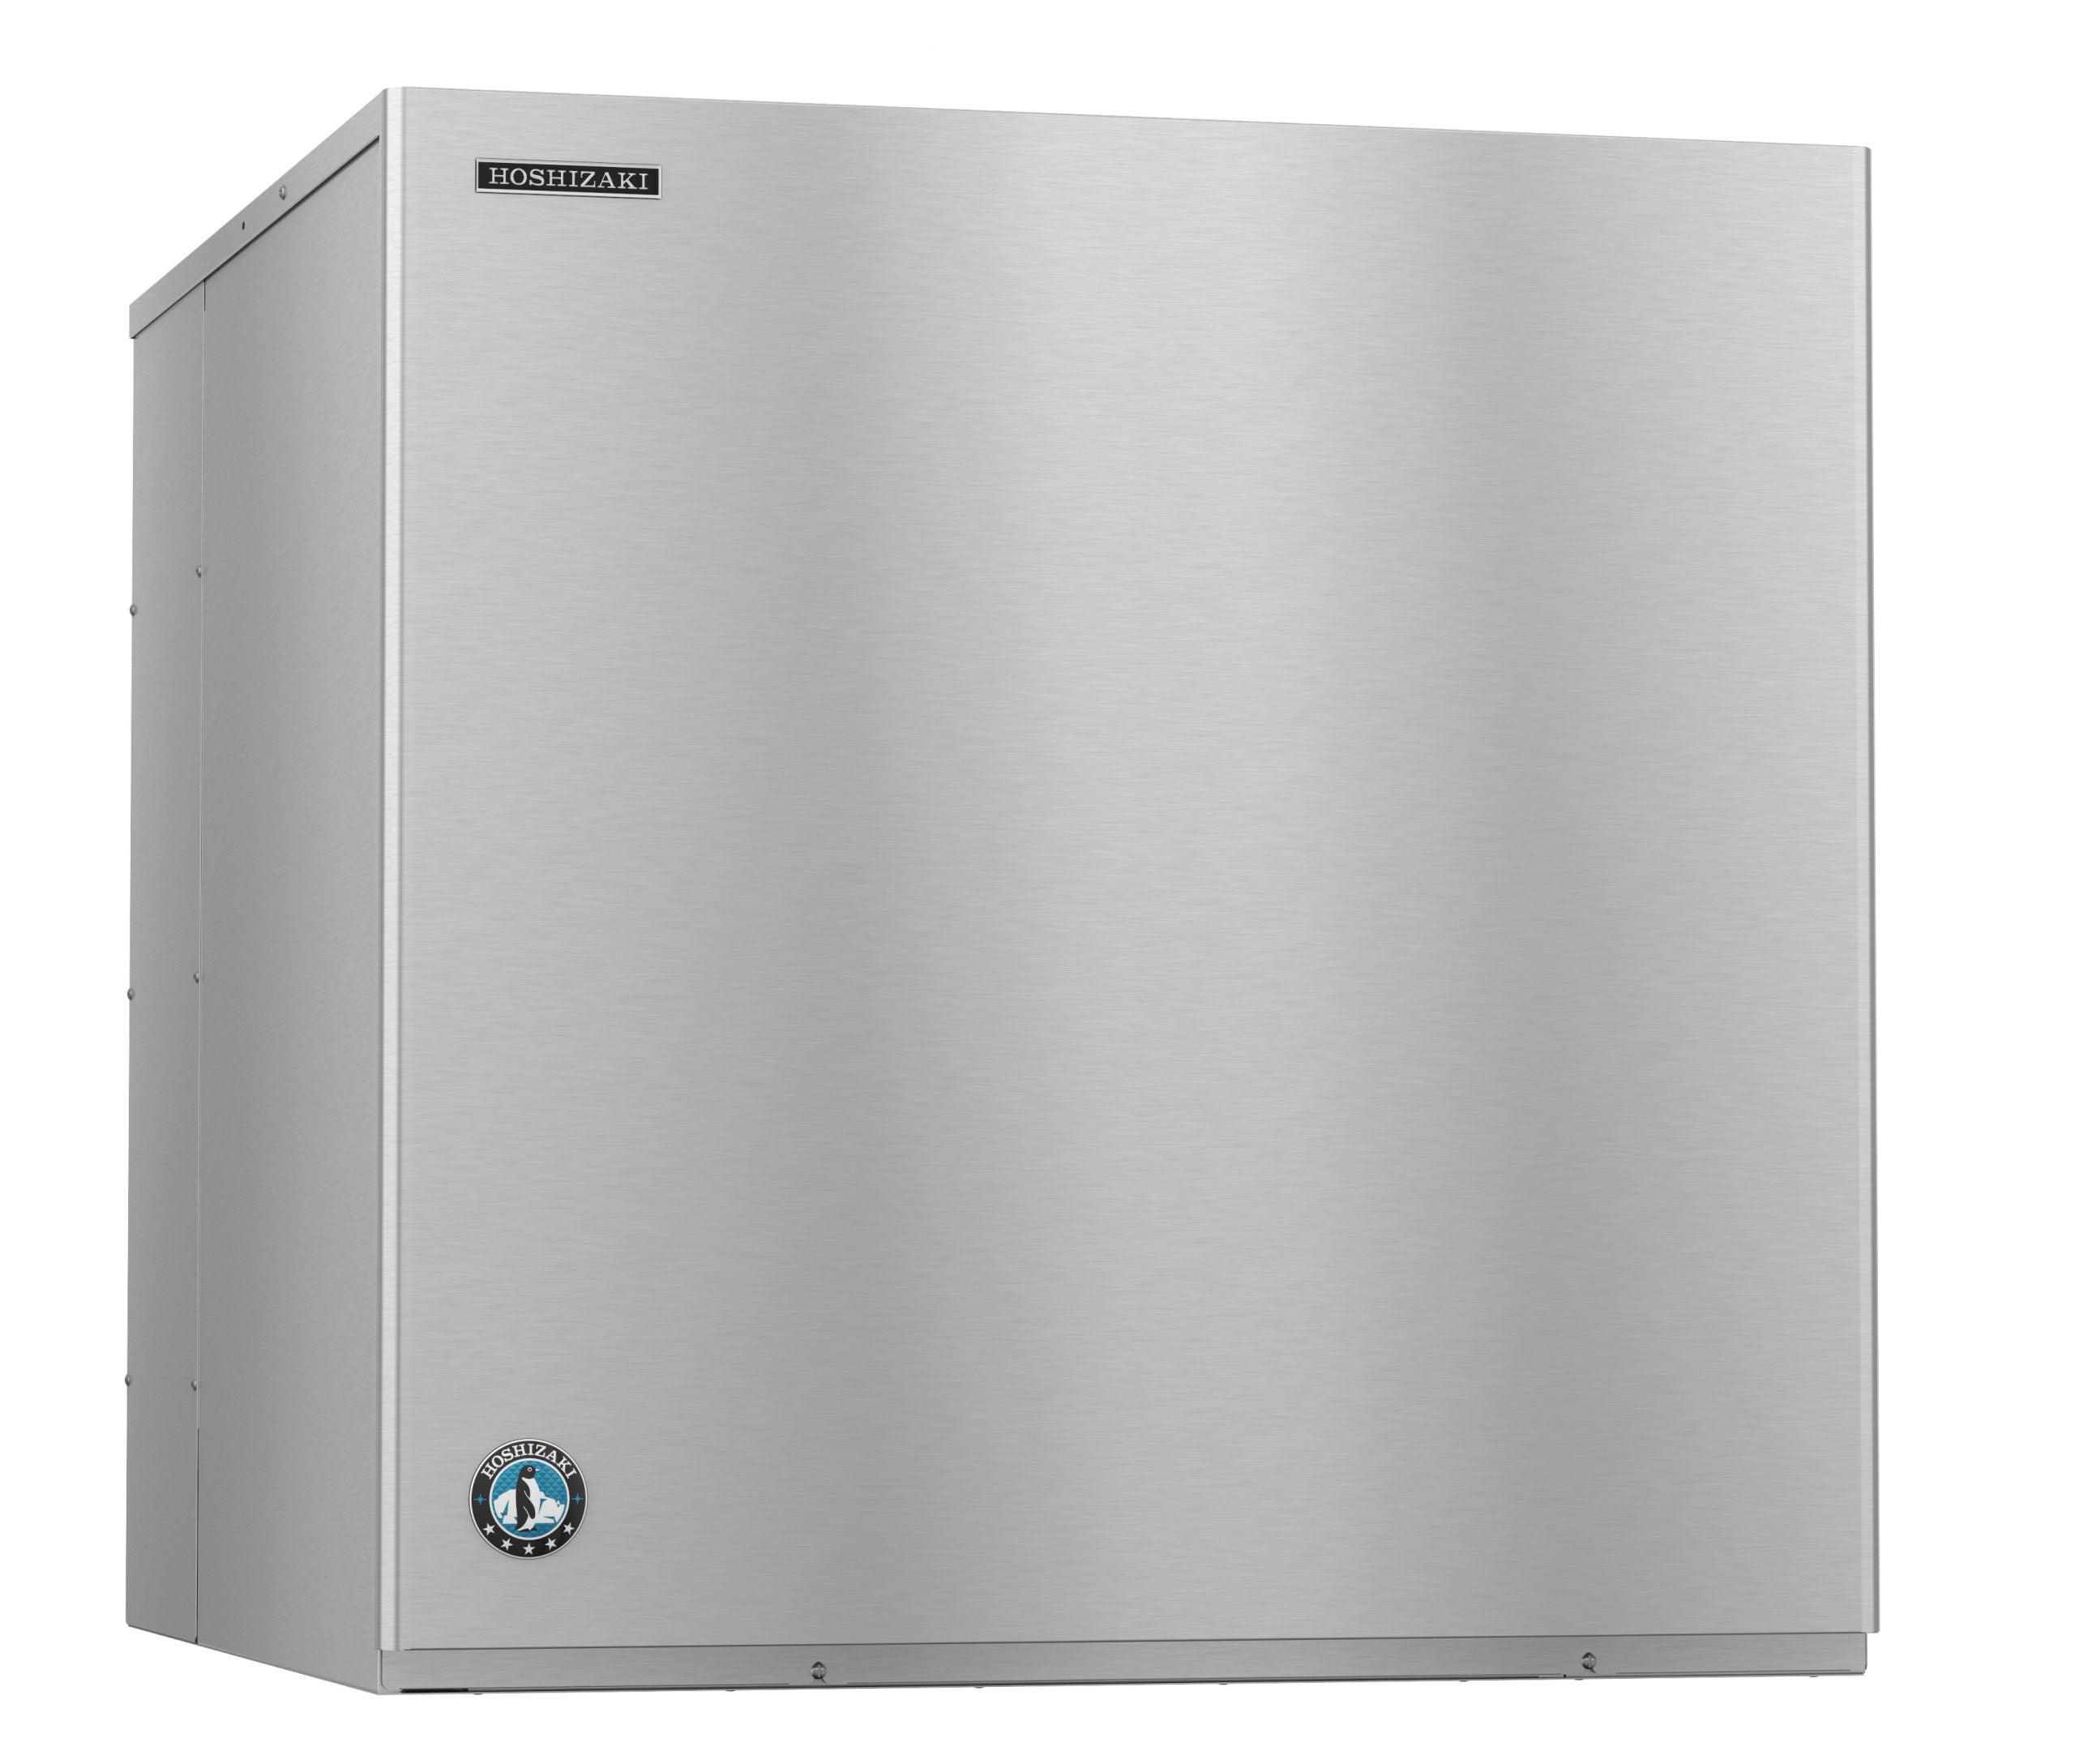 Hoshizaki KMH-2100SWJ3 | 36" Wide 3 Phase Water-Cooled Crescent Cuber Ice Maker